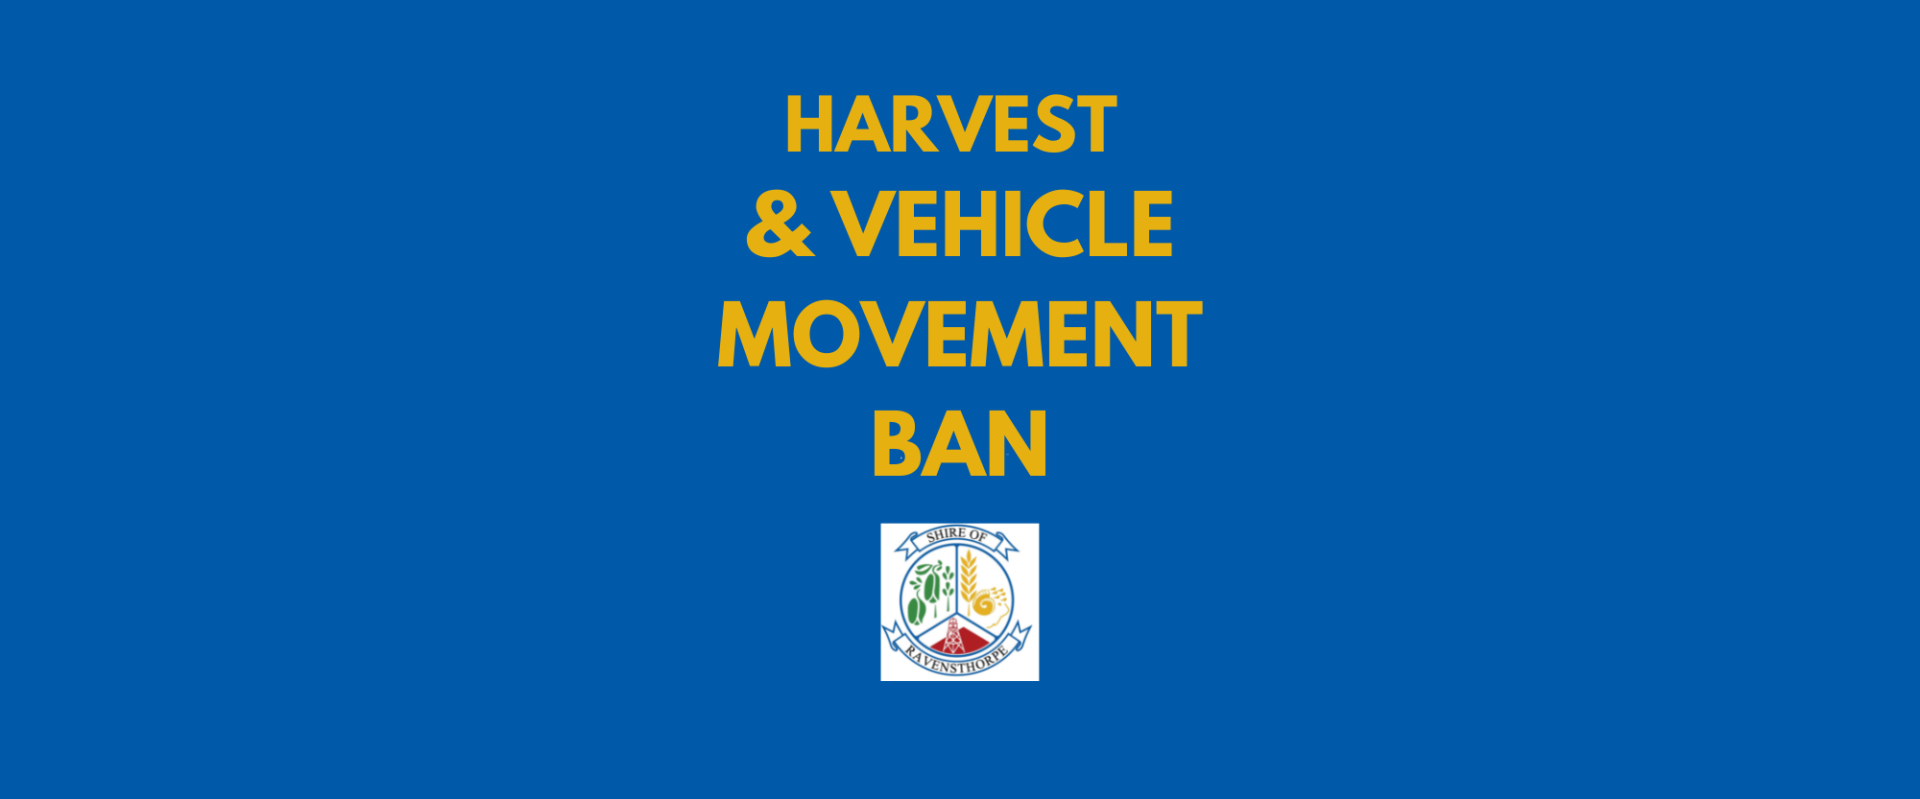 Harvest and Vehicle Movement Ban Tues Feb 21